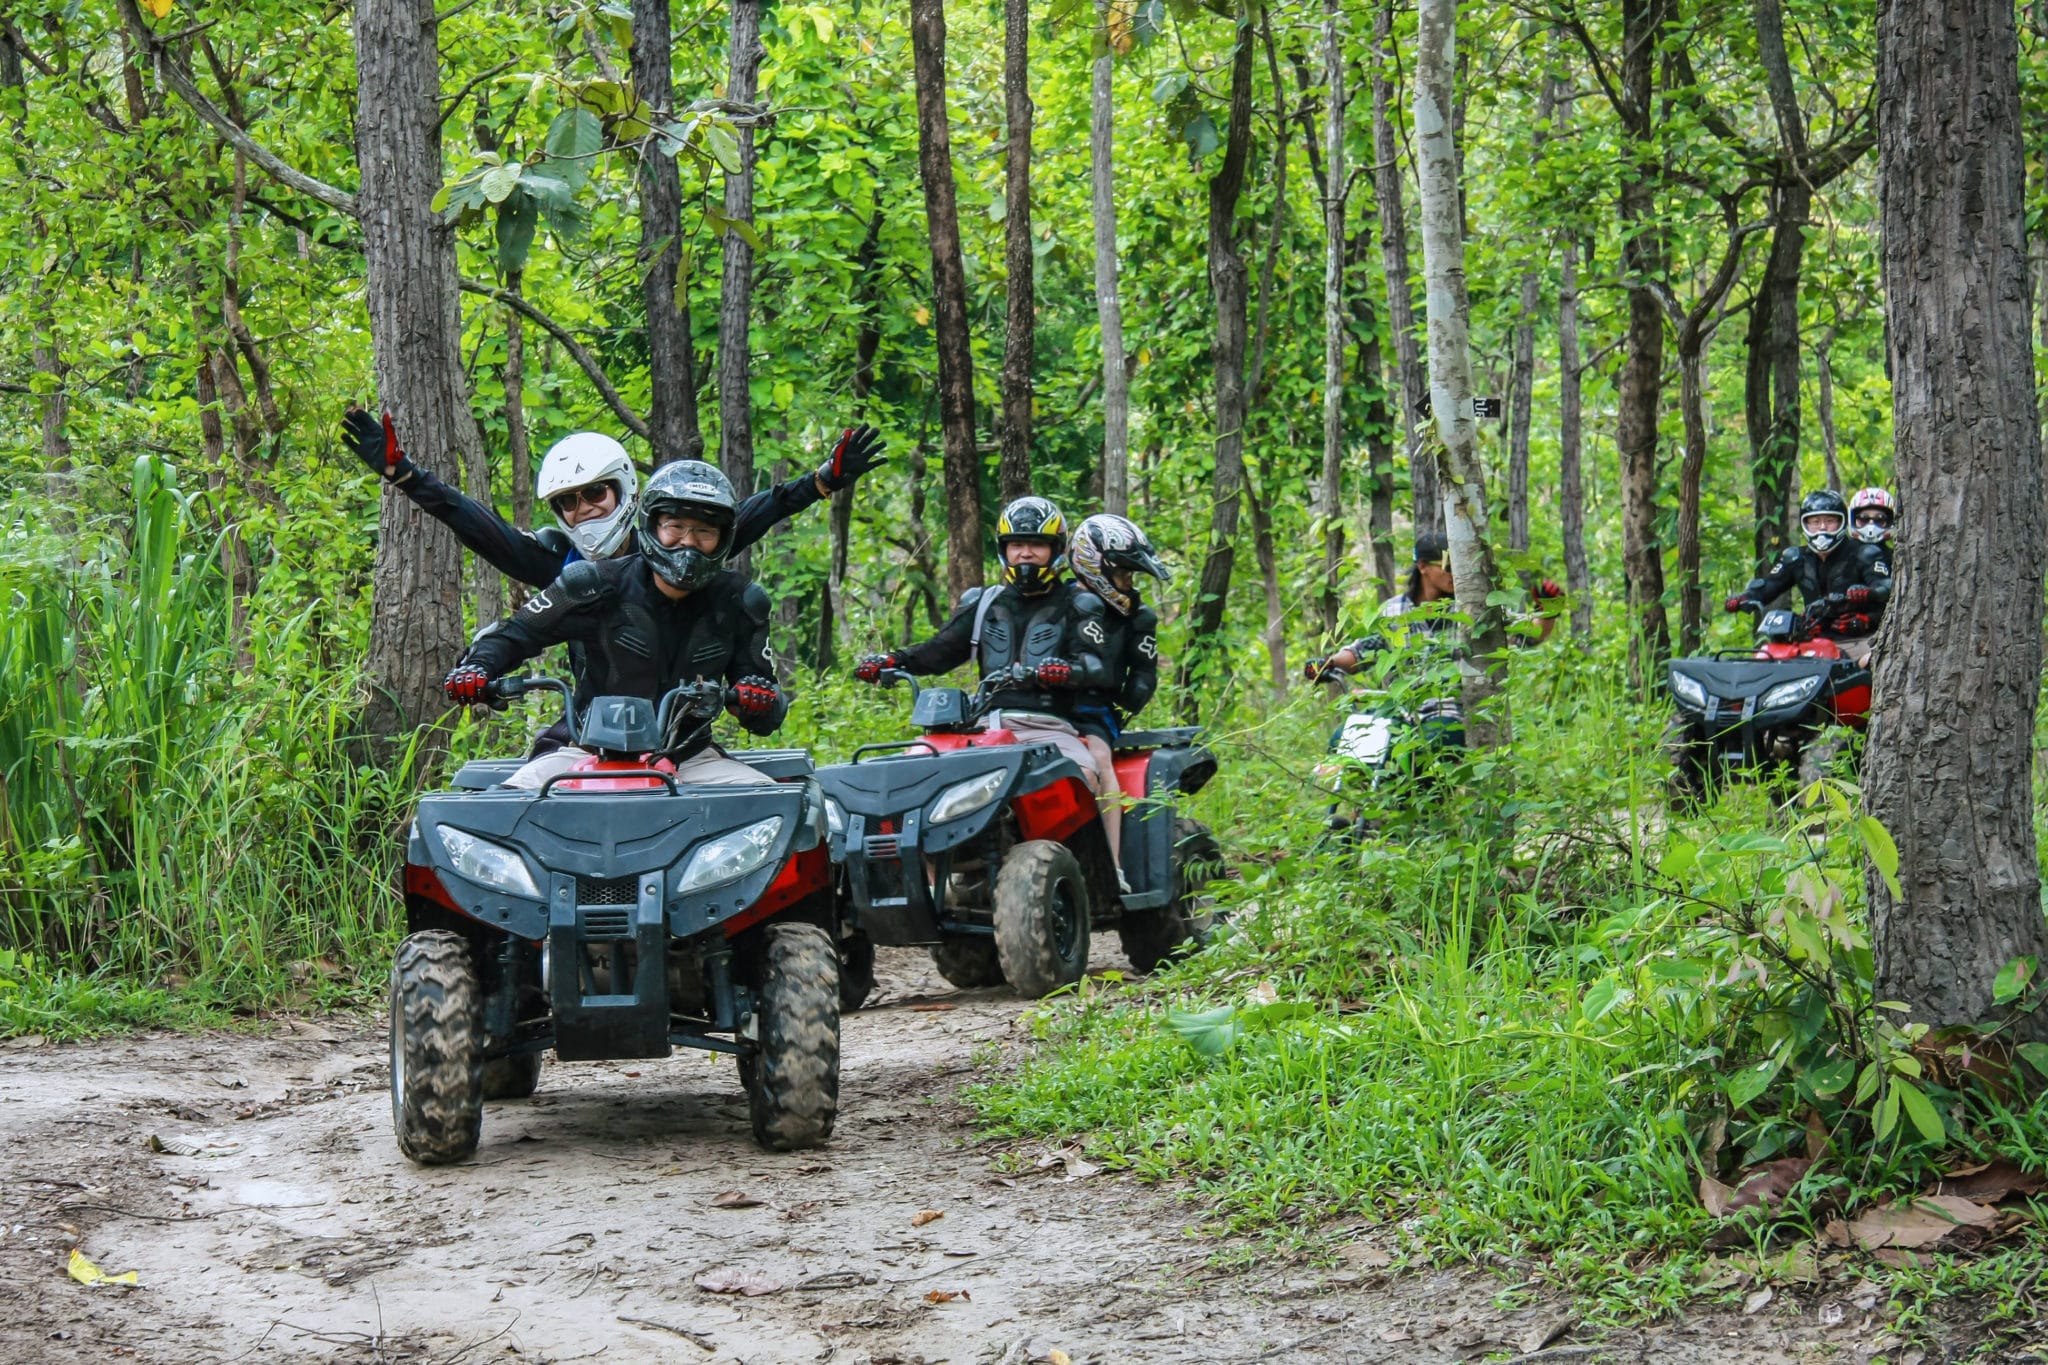 The truth about dangerous ATVs